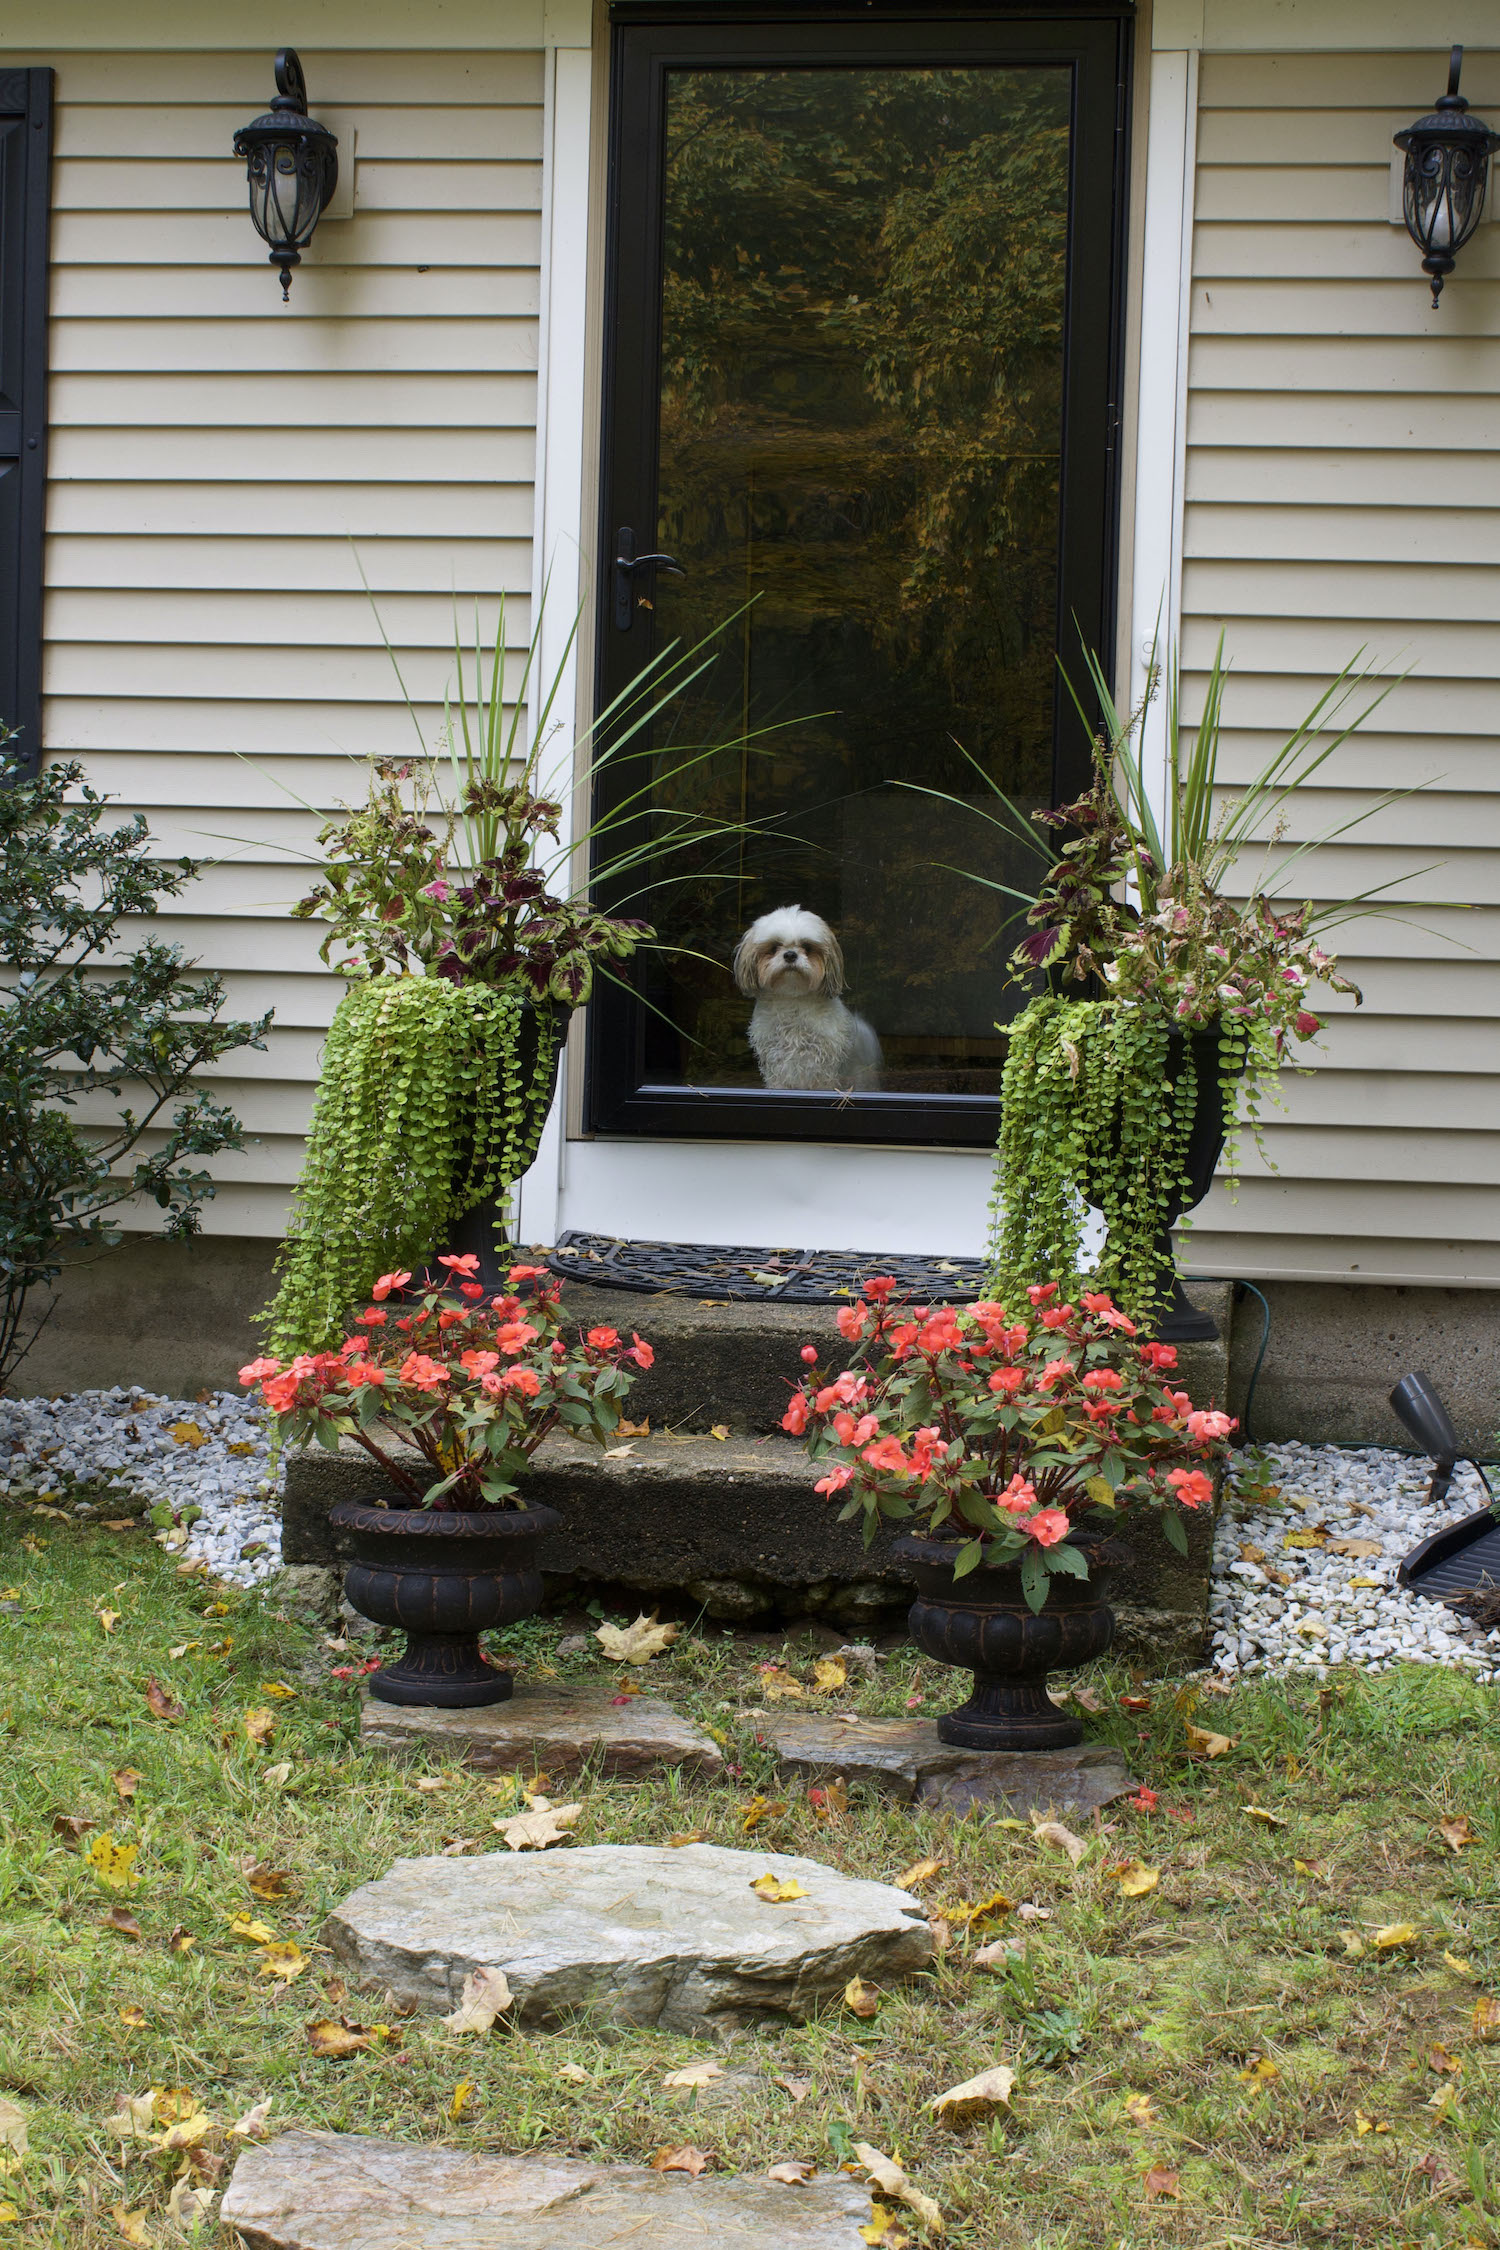 dog looks out from behind glass door with potted plants on either side, stone path leading up to it